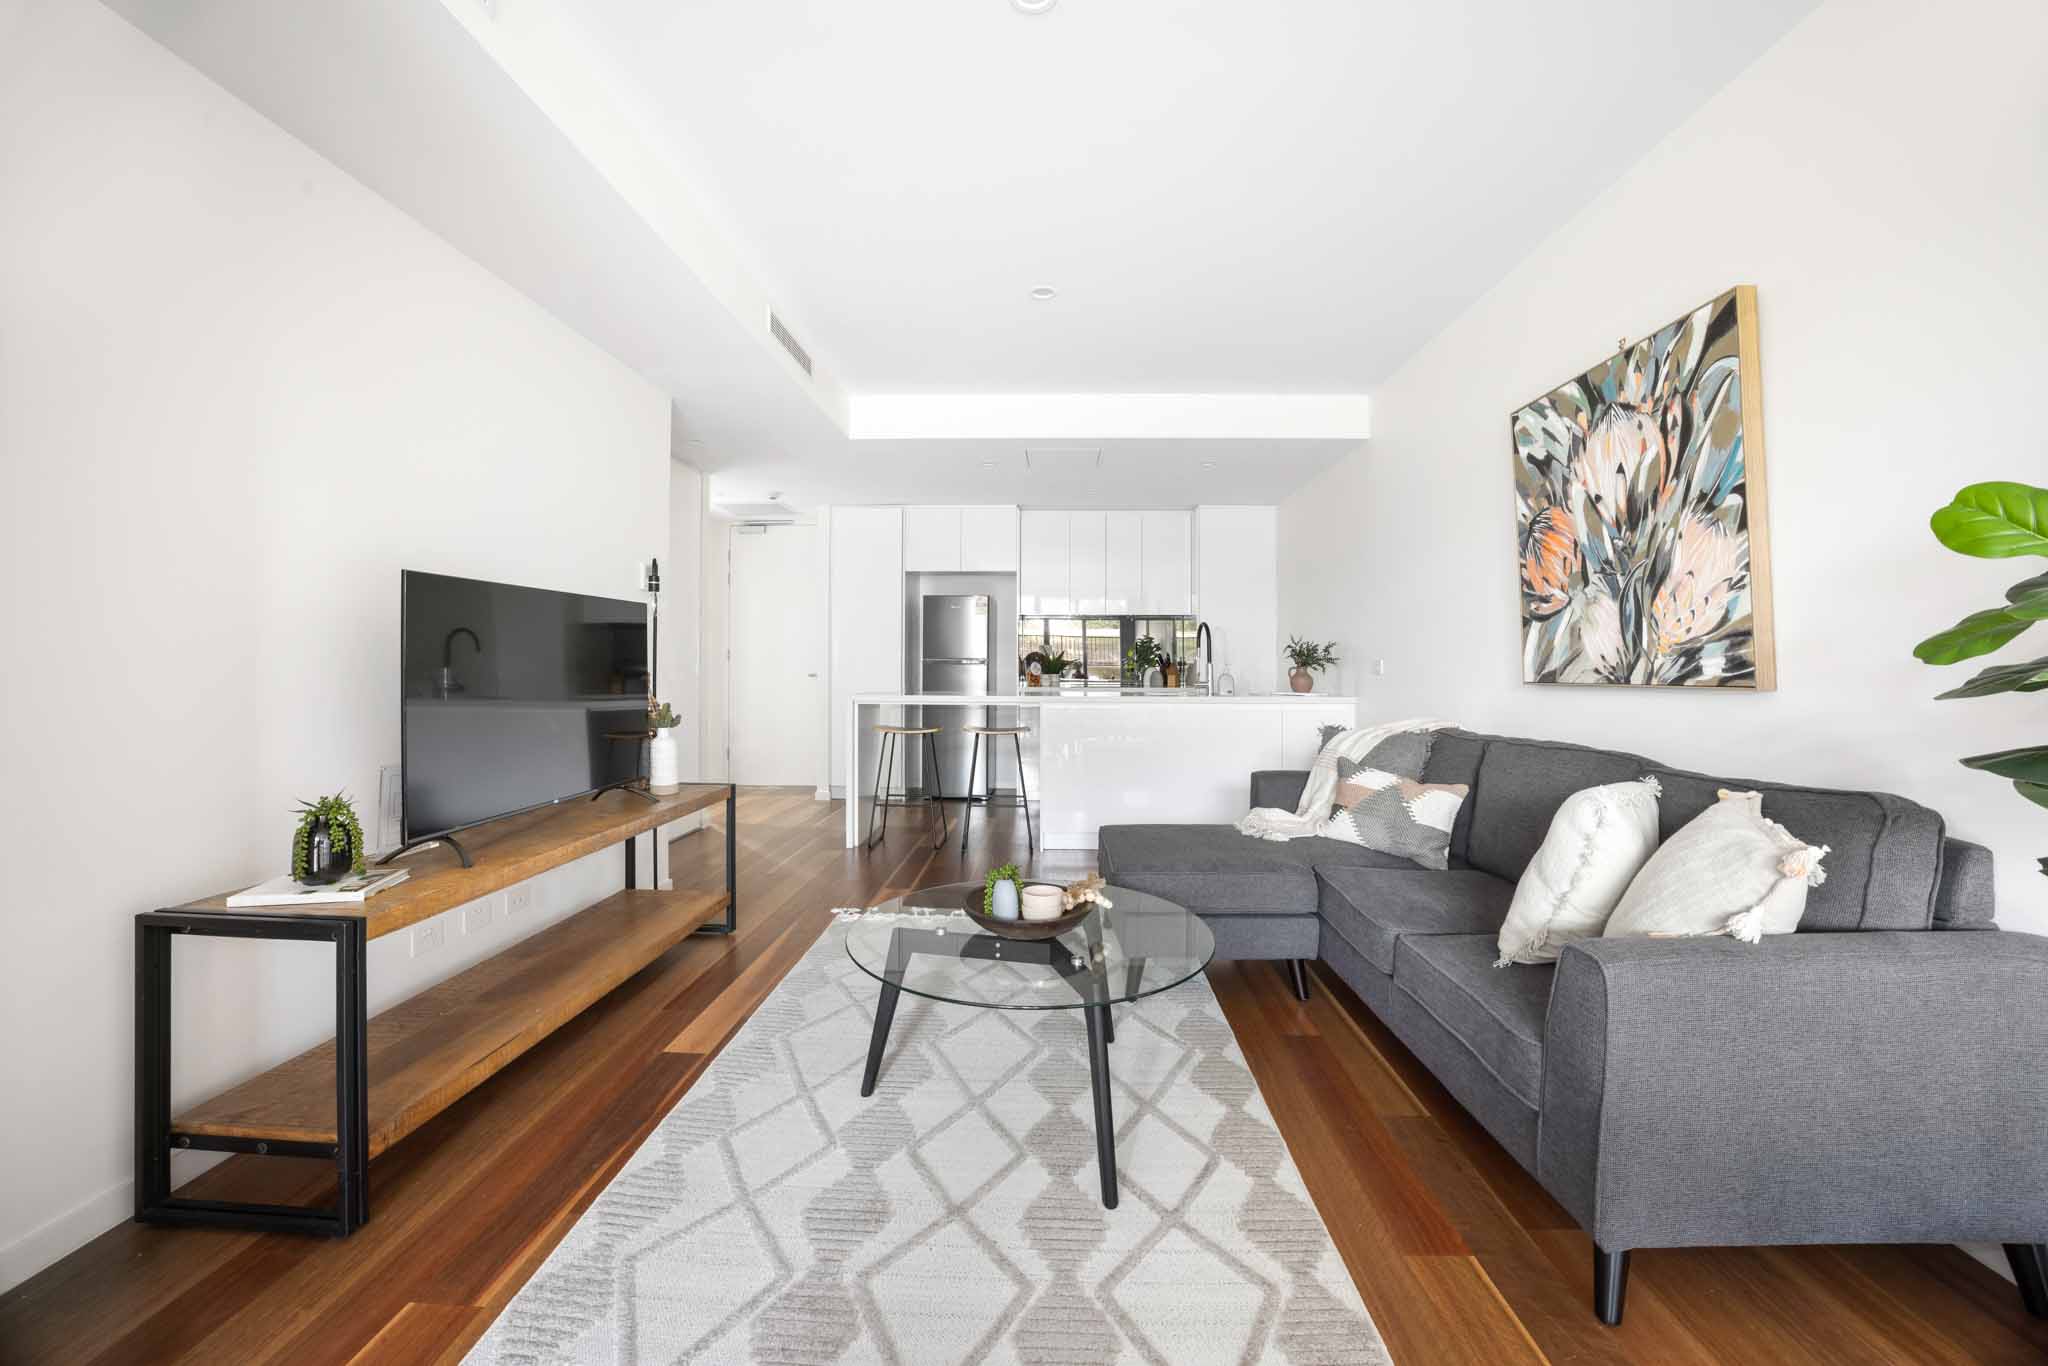 Lounge - Two Bedroom Apartment - Founders Lane Apartments - Canberra - Urban Rest